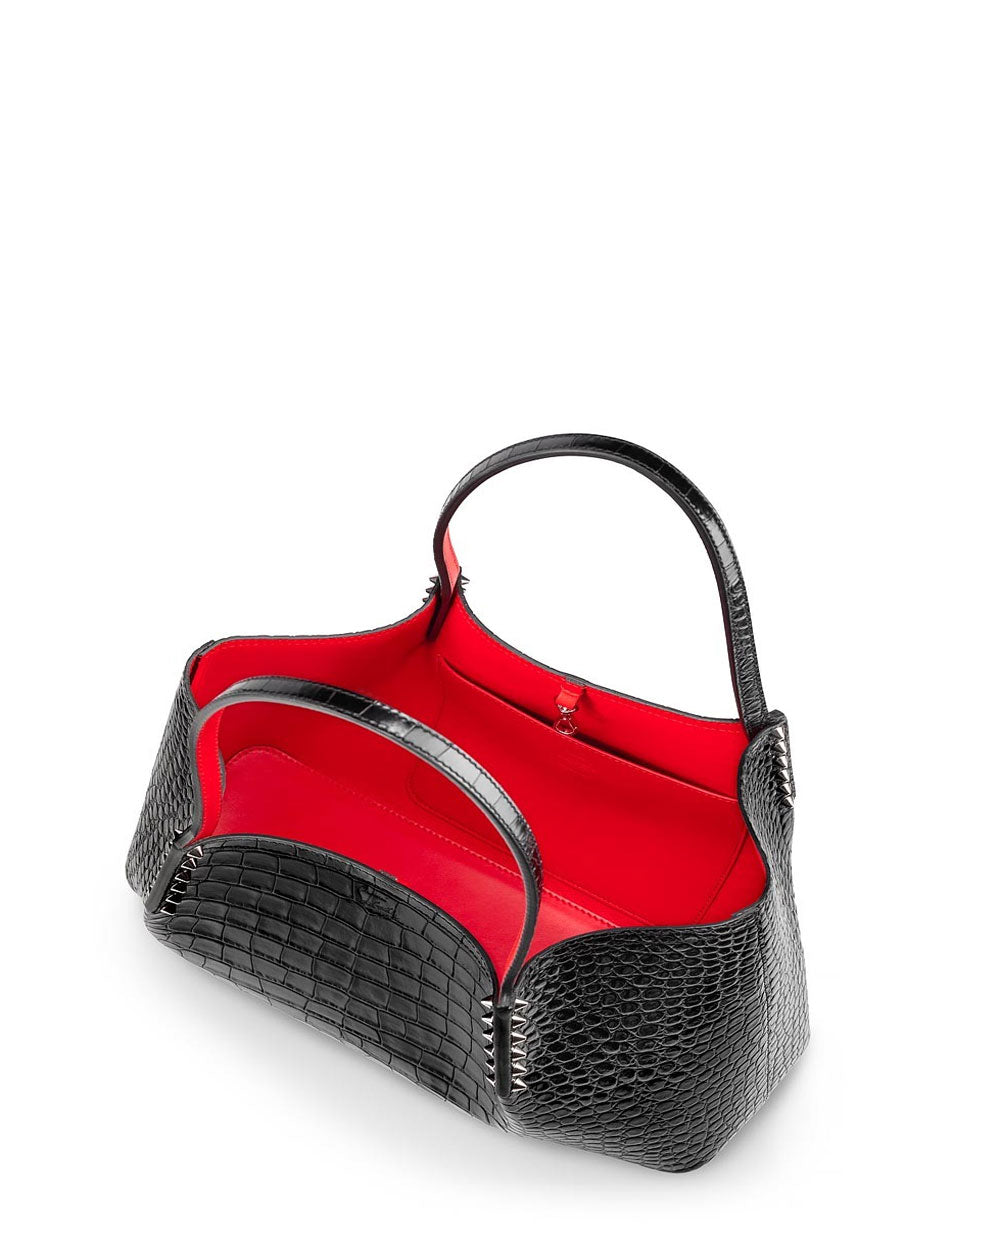 Christian Louboutin Off White Croc Embossed Leather Cabarock Shopper Tote  Christian Louboutin